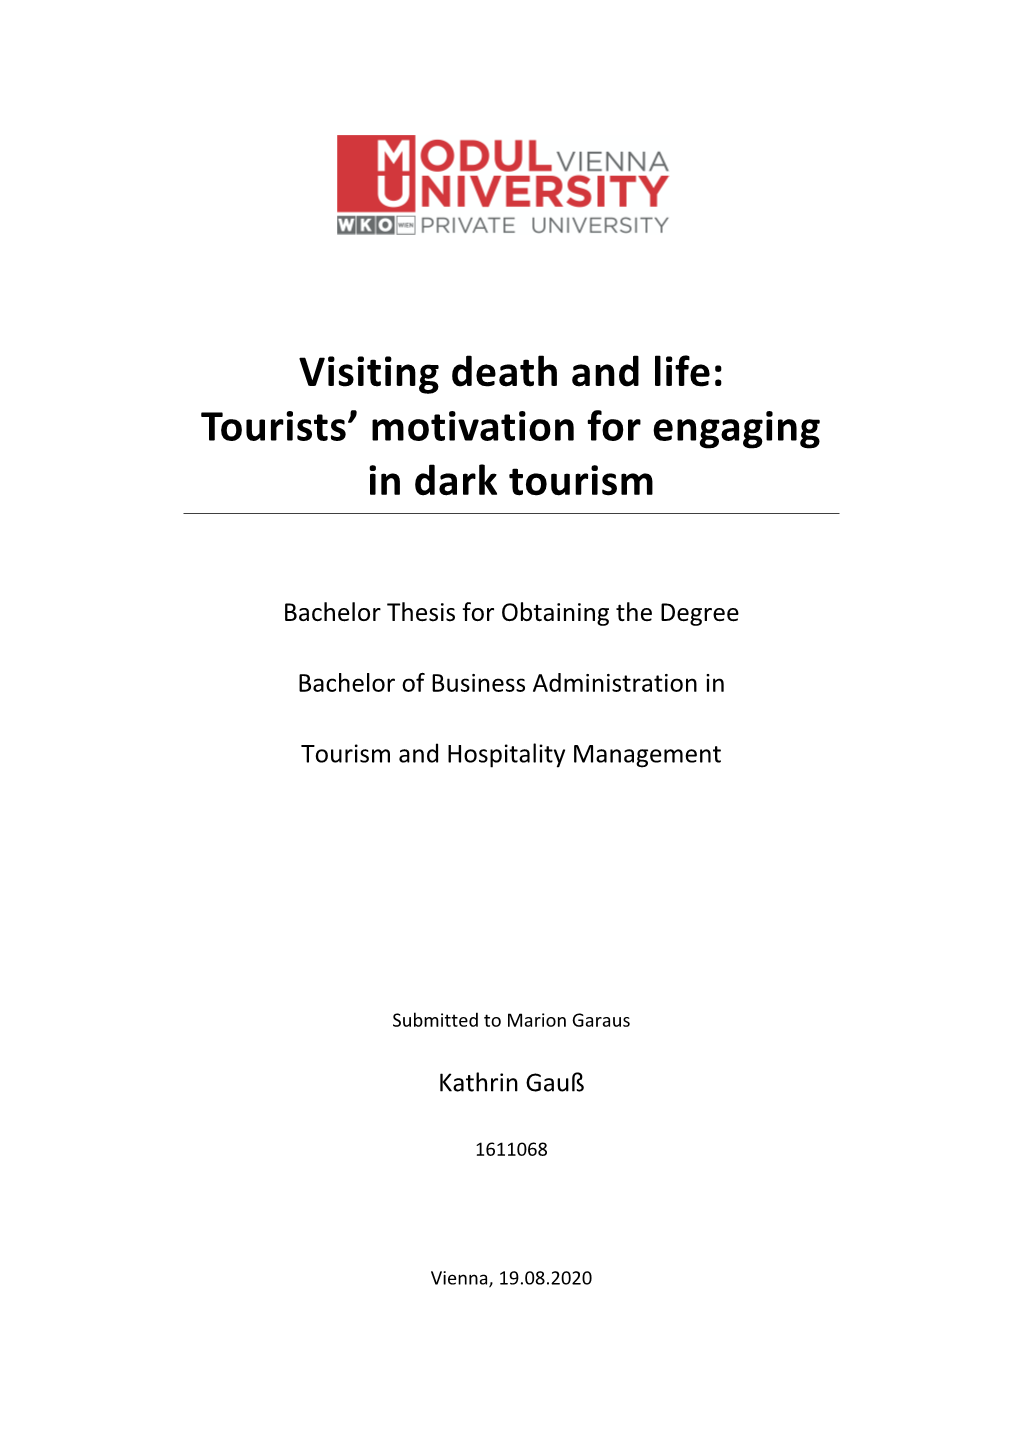 Tourists' Motivation for Engaging in Dark Tourism